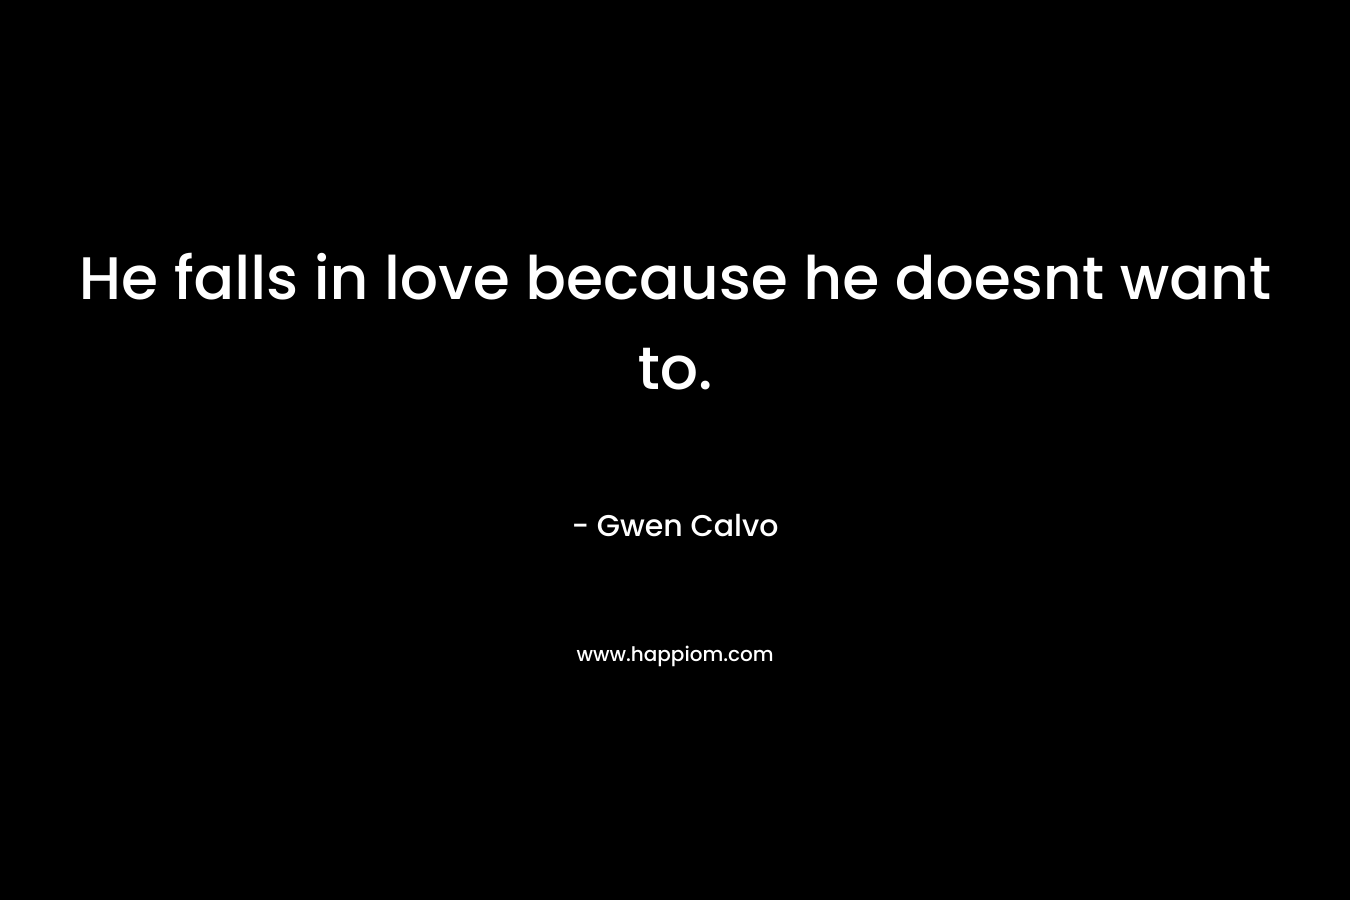 He falls in love because he doesnt want to.